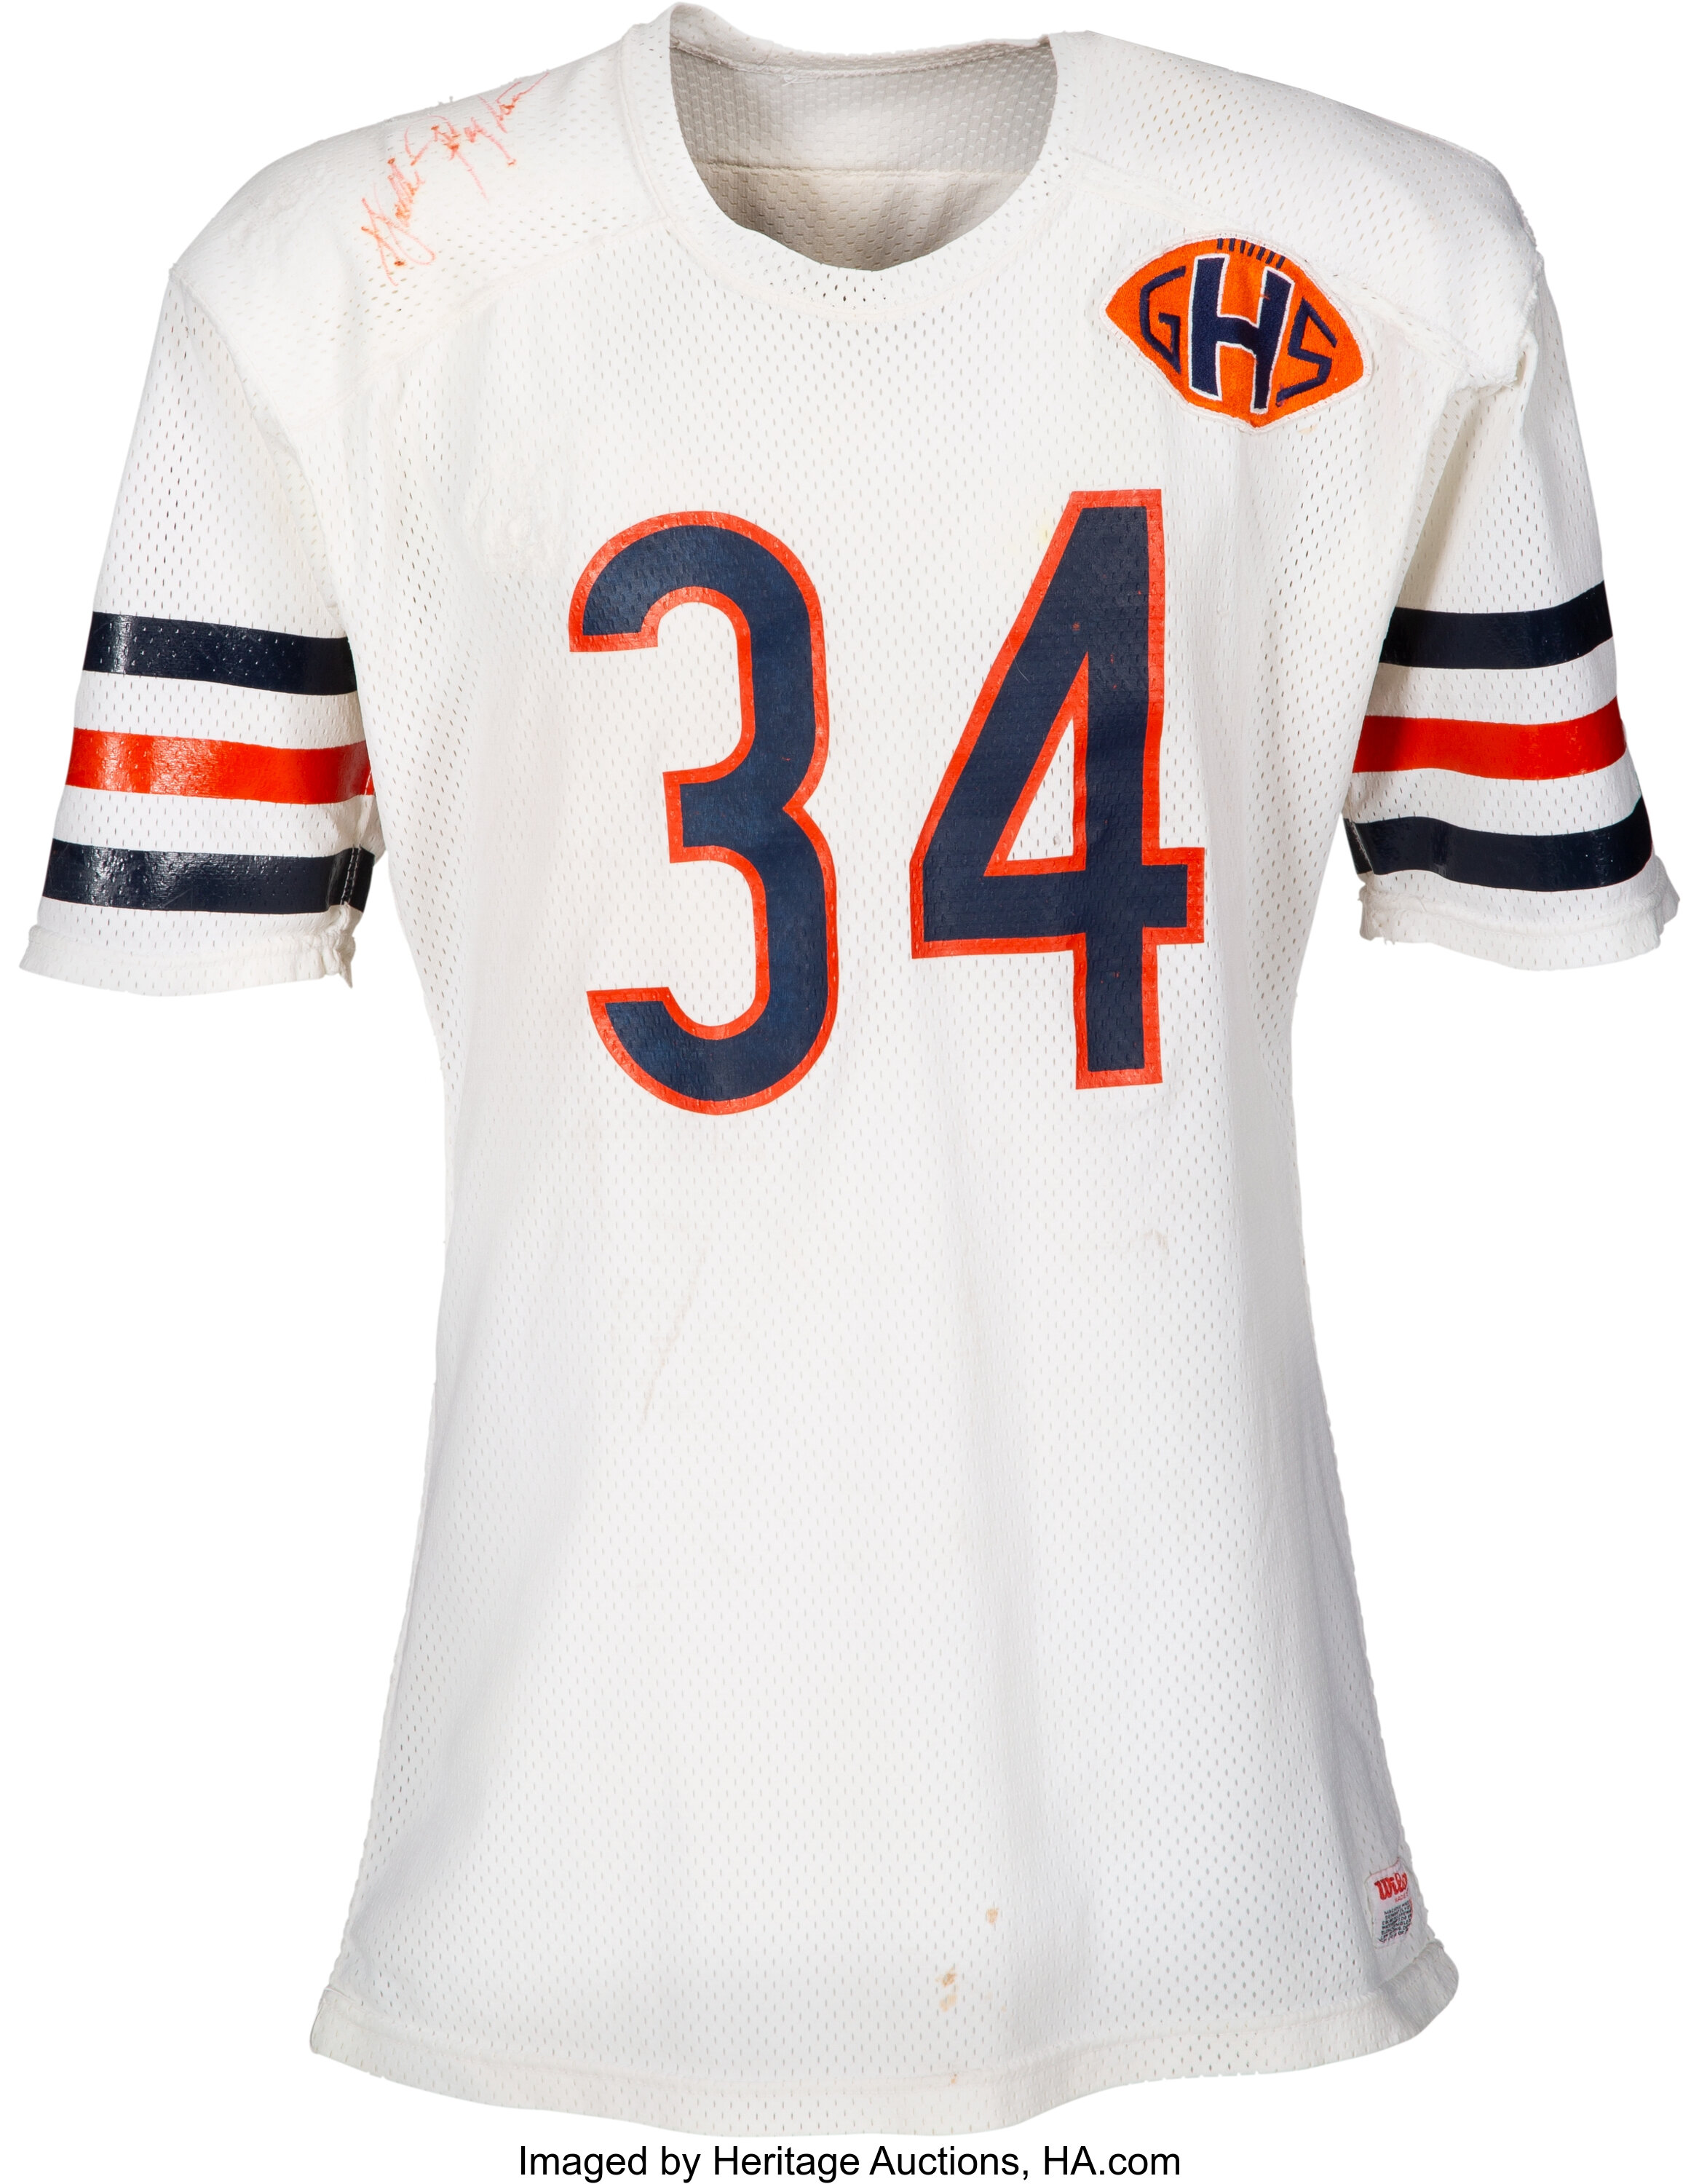 Sold at Auction: Walter Payton Autographed Vintage Jersey